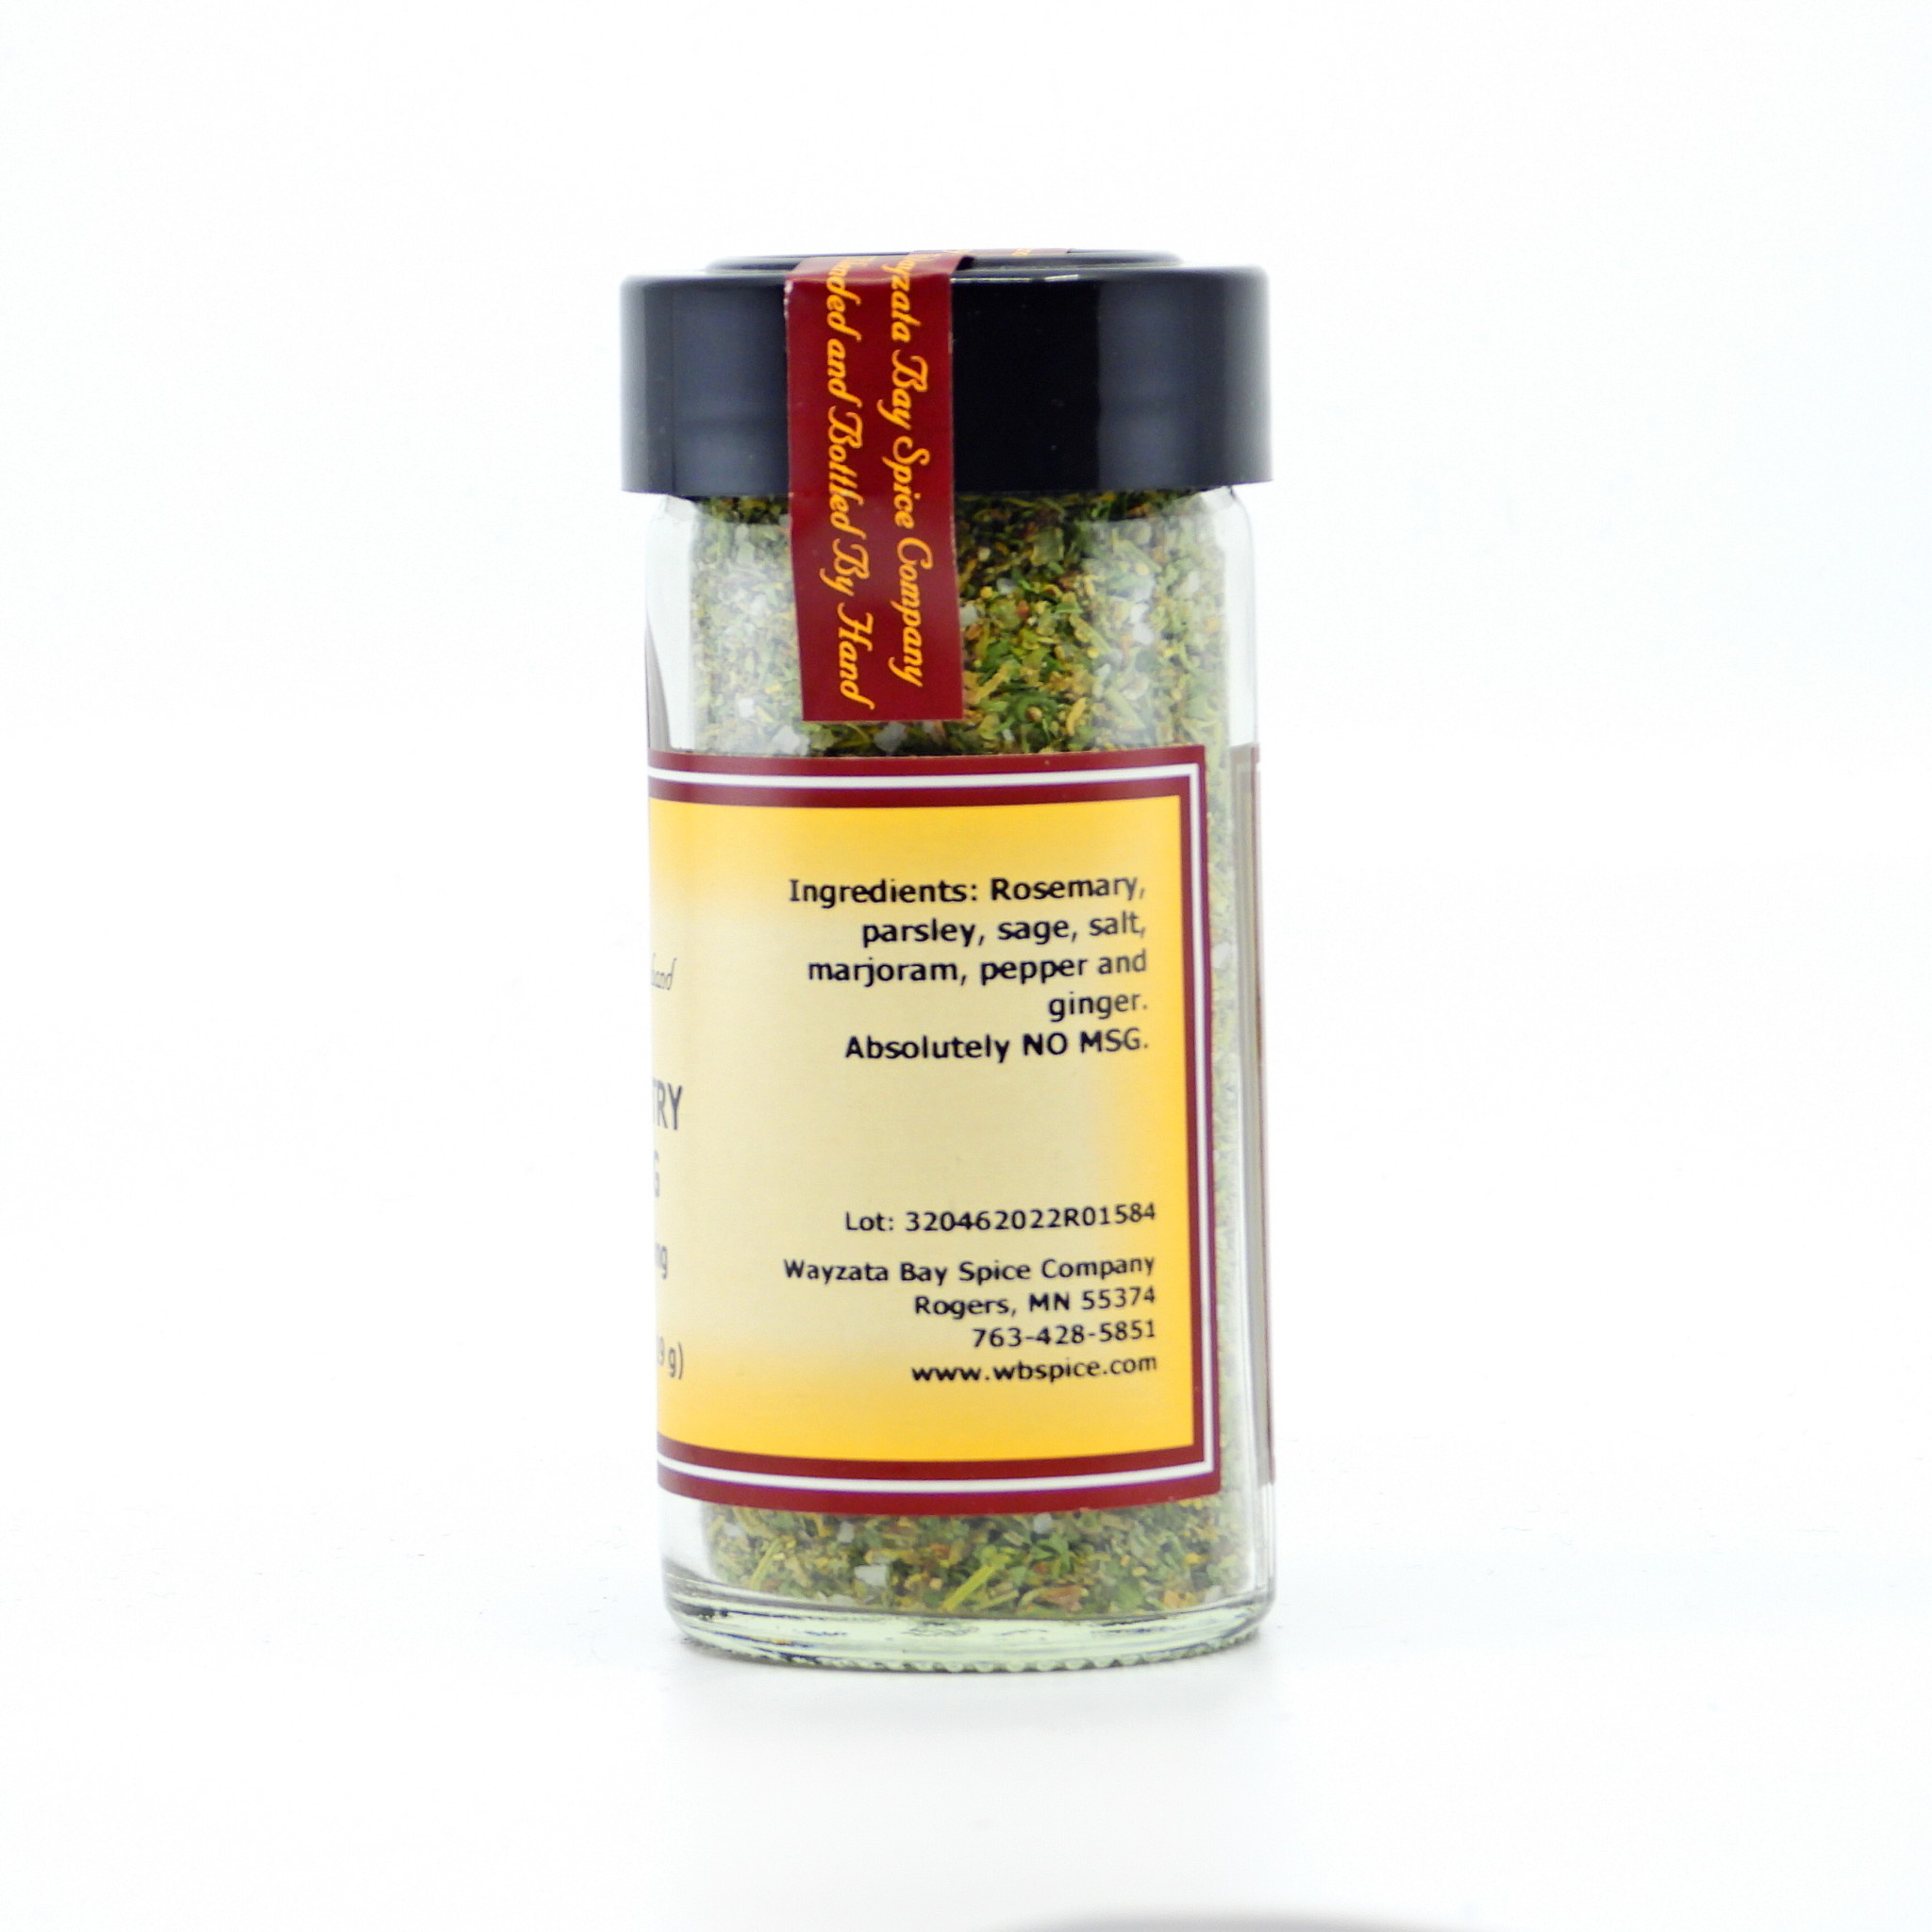 Sage & Spice Poultry Seasoning